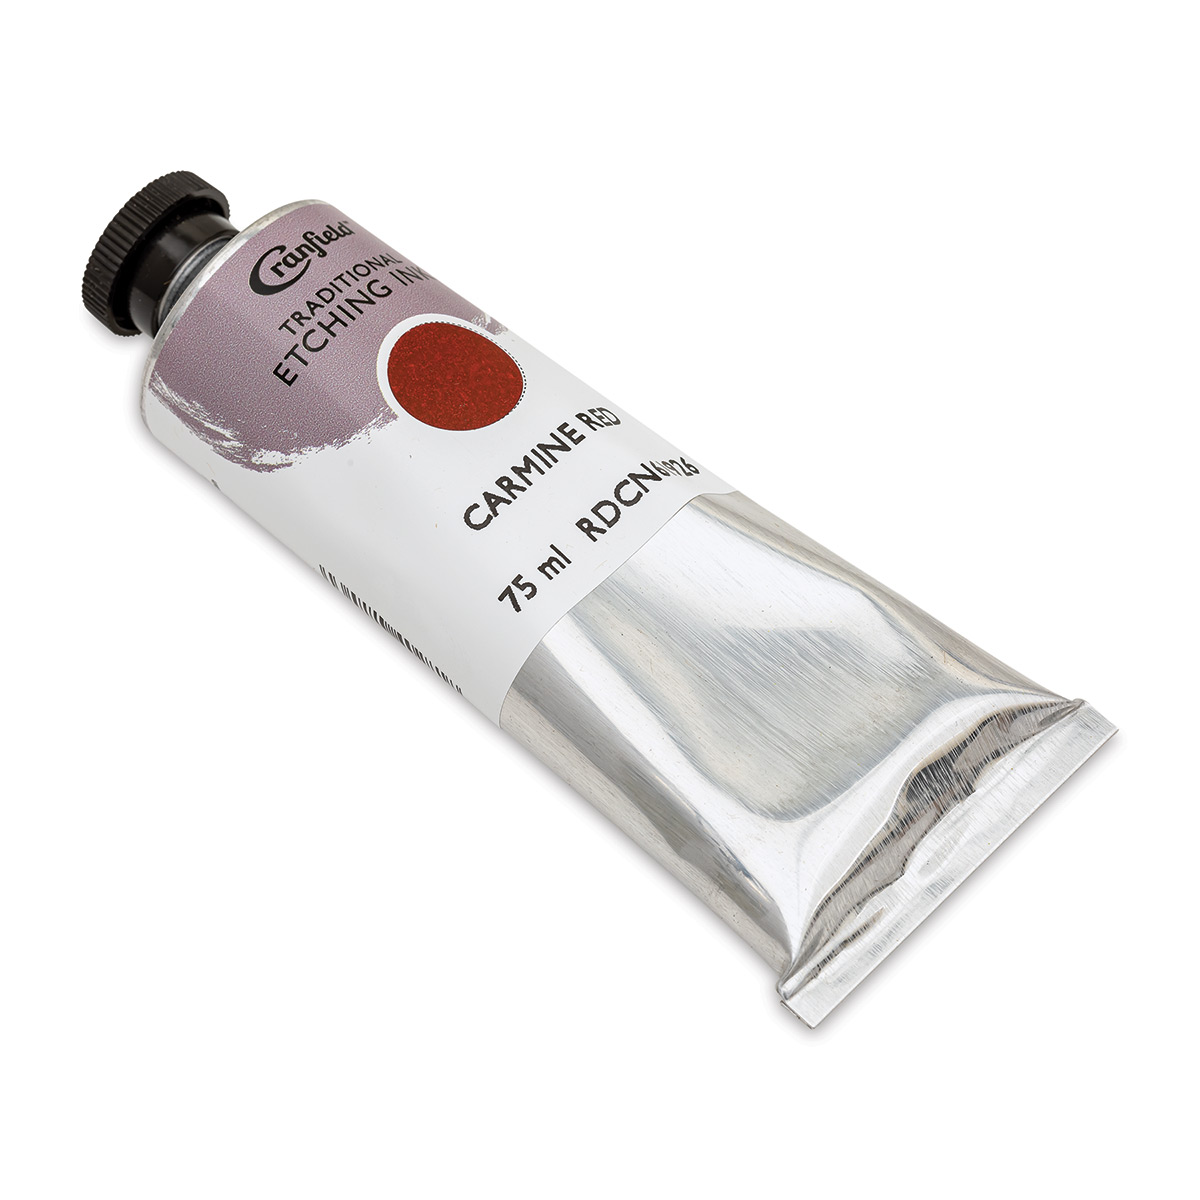 Cranfield Traditional Etching Ink - Crimson Red, 75 ml